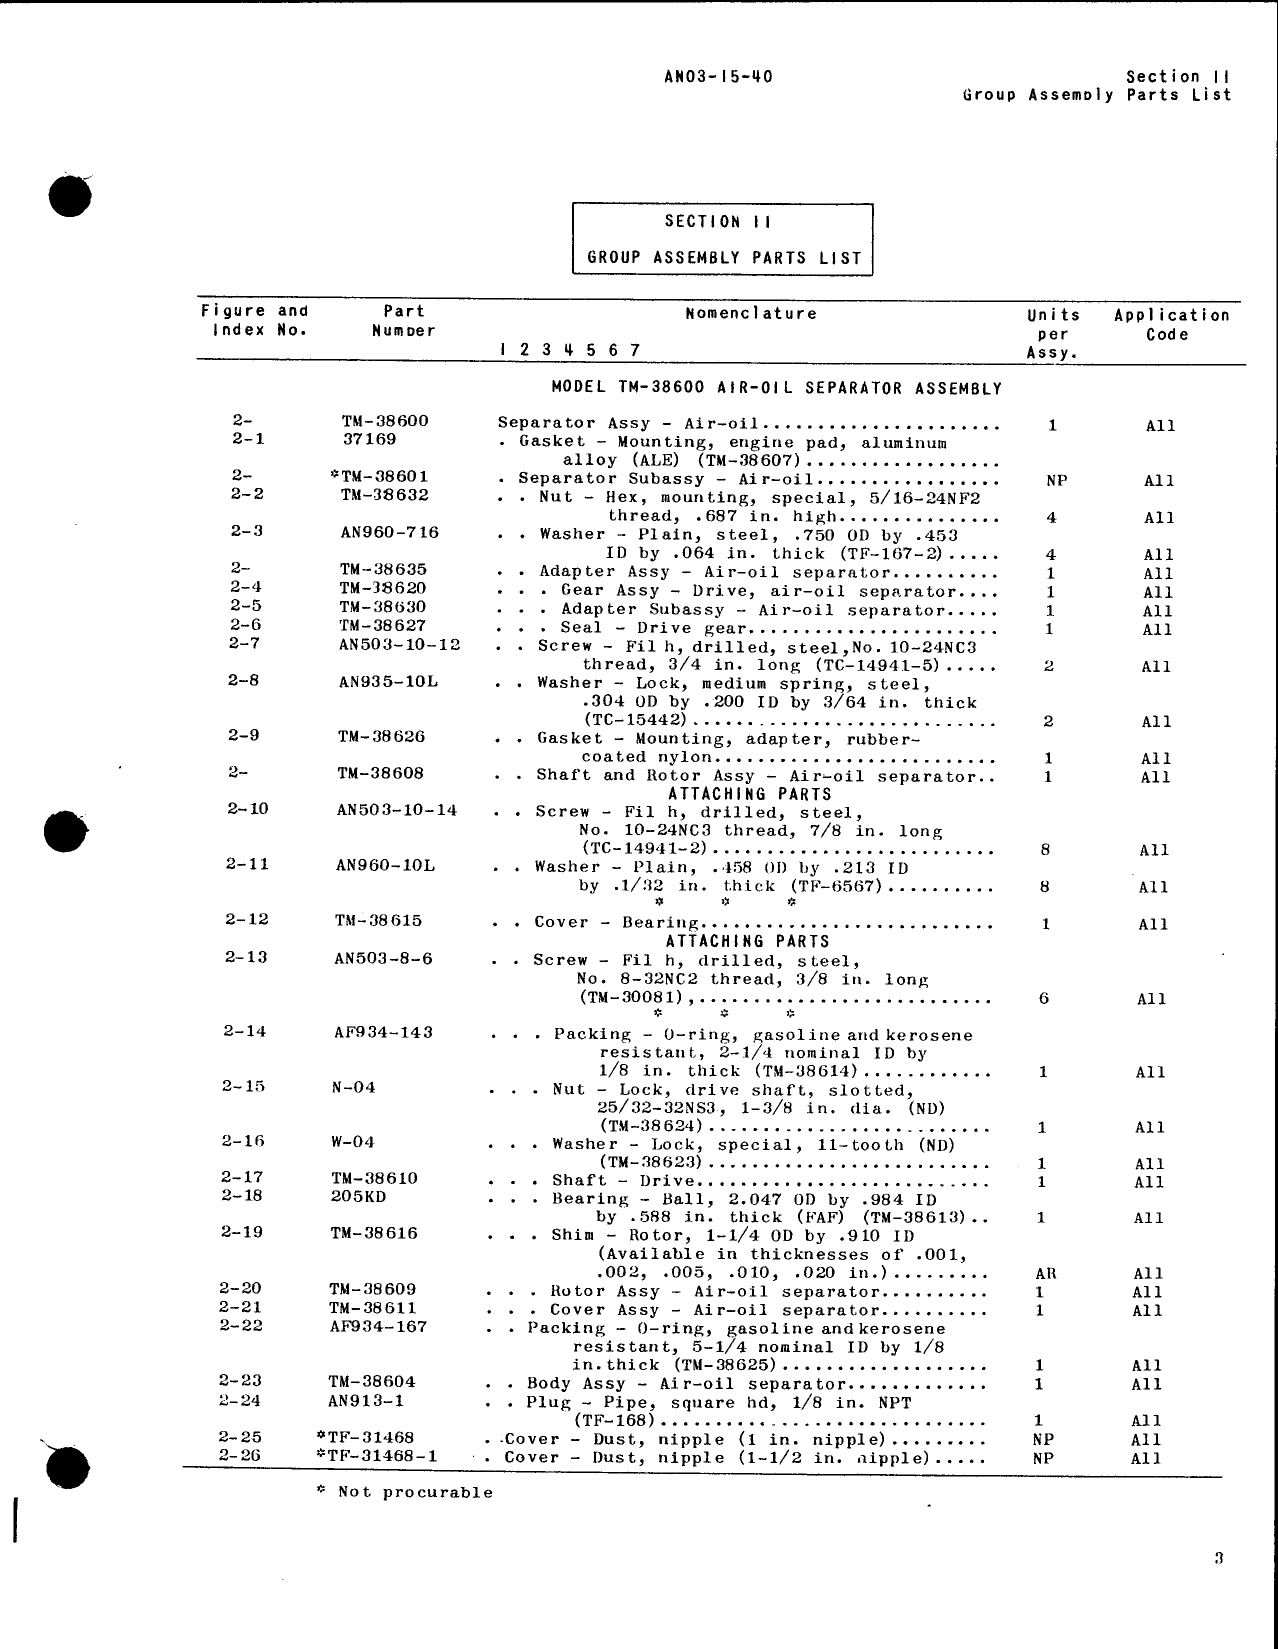 Sample page 5 from AirCorps Library document: Parts Catalog for Model TM-38600 Air-Oil Separator (Thompson)